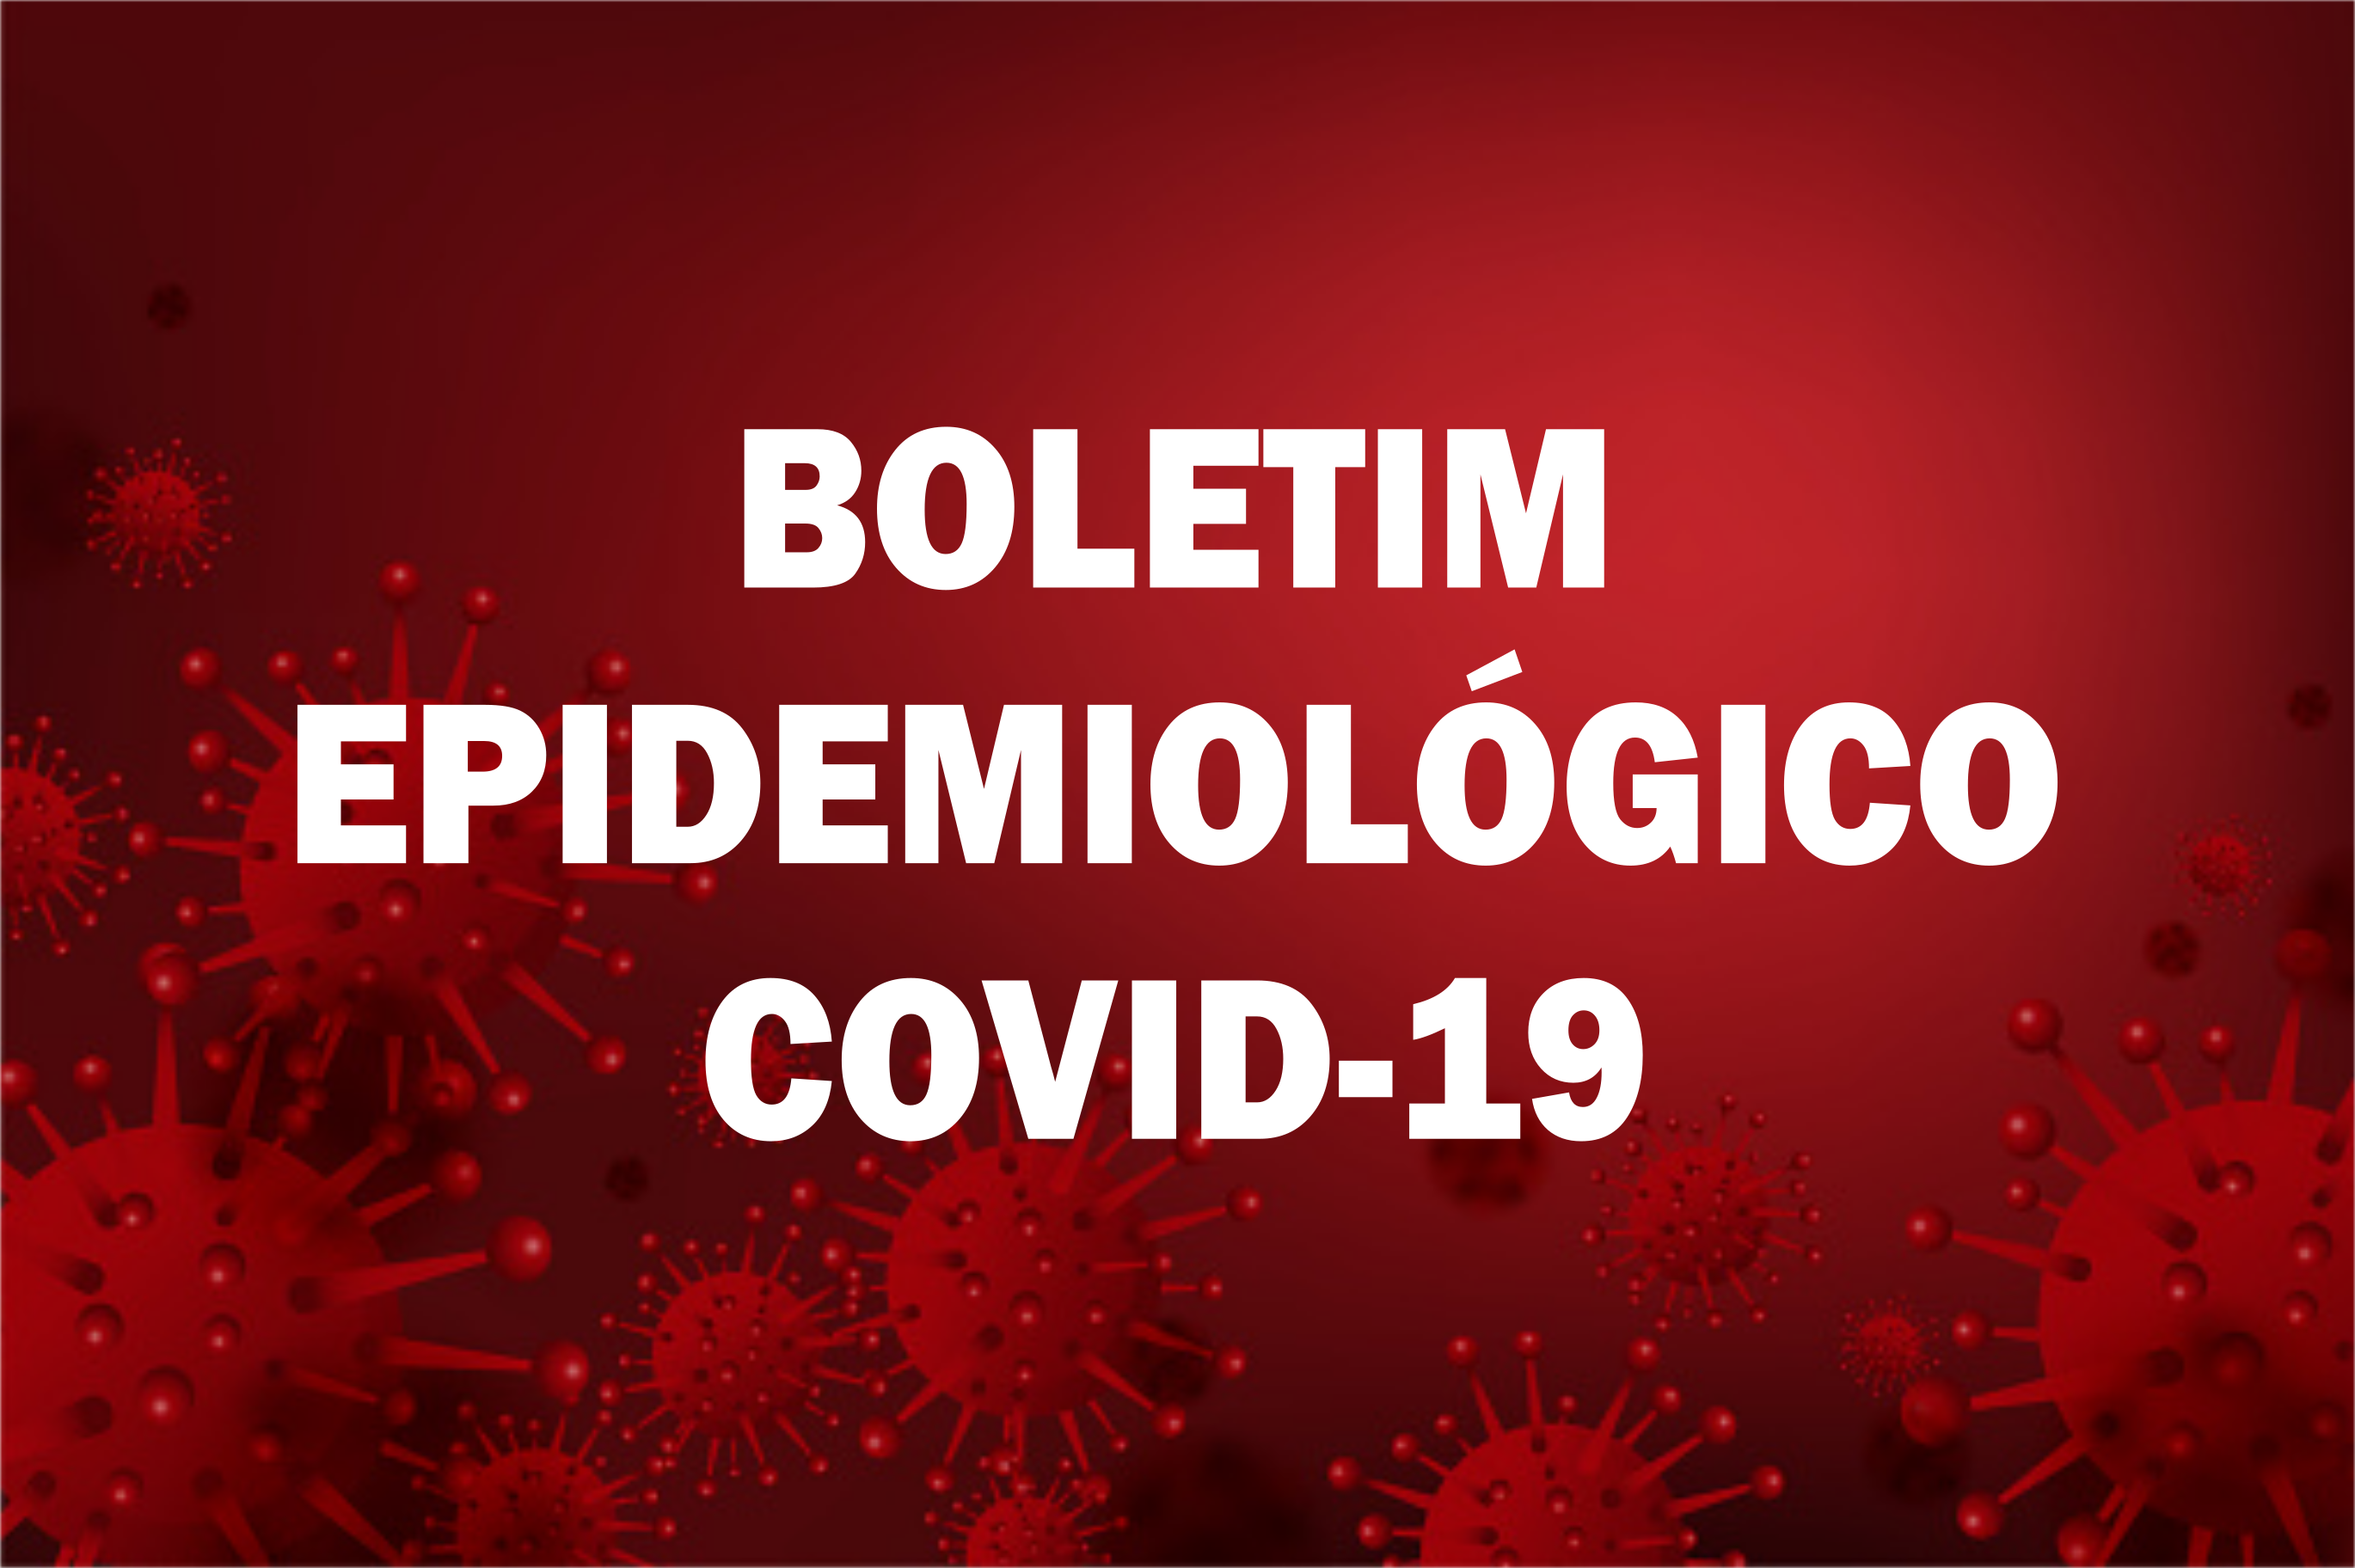 You are currently viewing BOLETIM EPIDEMIOLÓGICO Nº 136 (COVID-19)